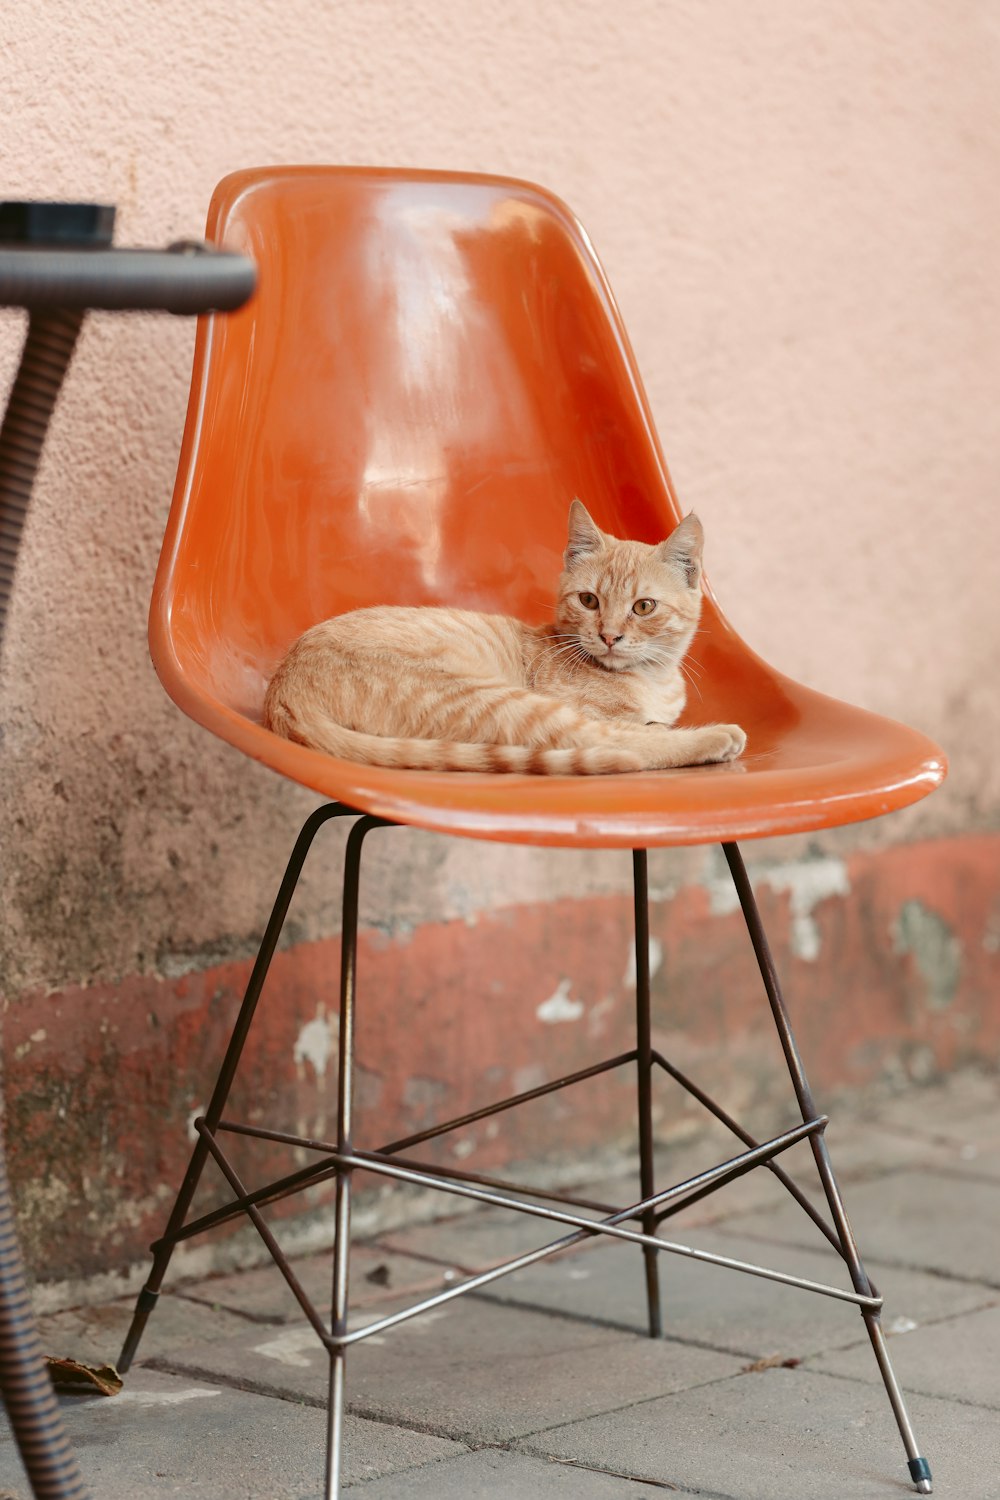 a cat is laying on a orange chair